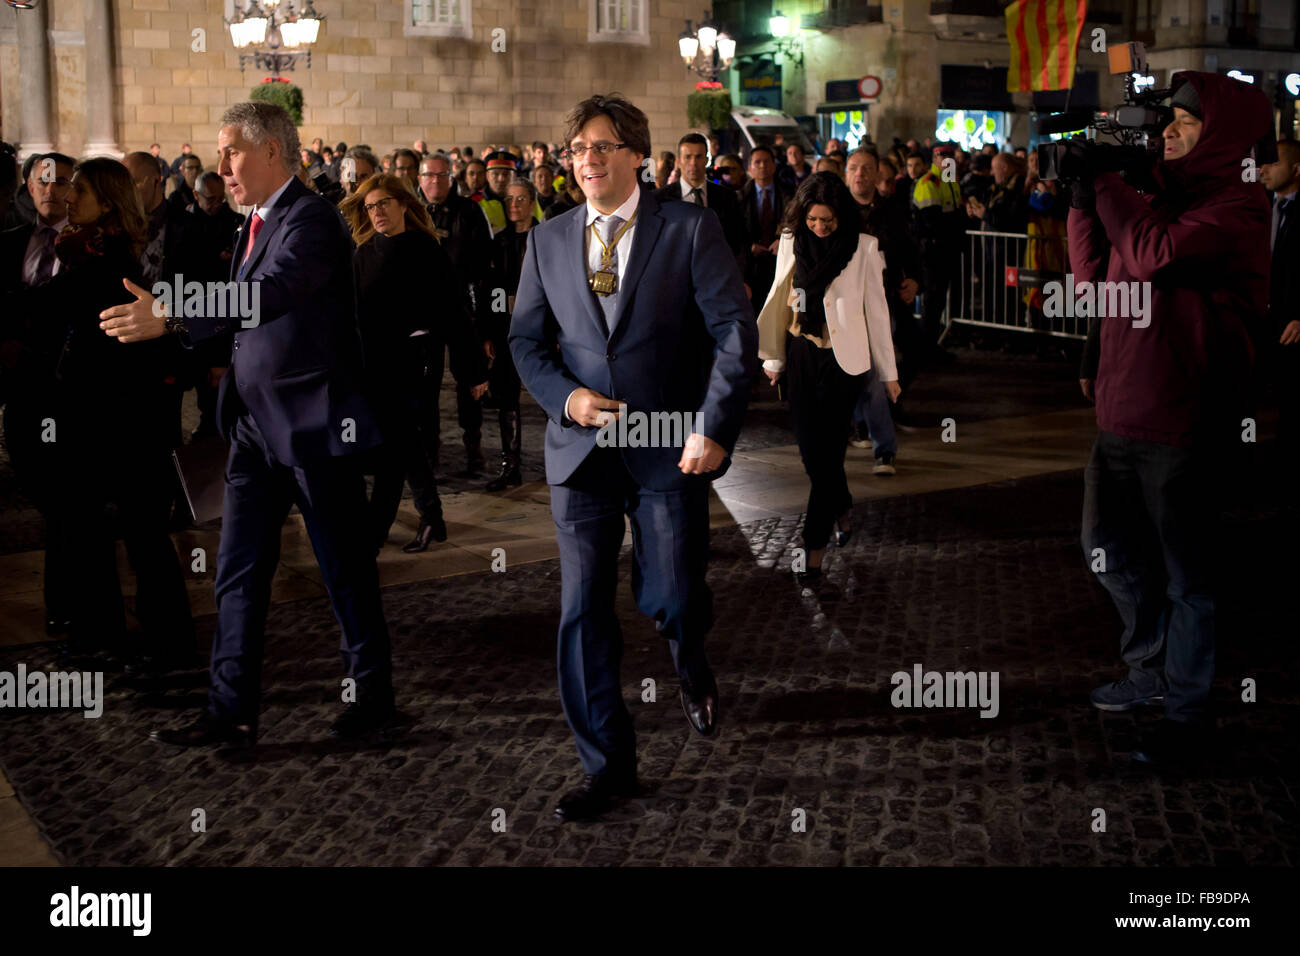 Barcelona, Spain. 12th January, 2016. Carles Puigdemont leaves  the Palau de la Generalitat (Catalan government headquarters)  after having been invested as a new president of Catalonia in Barcelona, Spain on 12 January, 2016. The new government of Catalonia has a secessionist plan that seeks independence from Spain and to proclaim the Catalan Republic in the next 18 months. Credit:   Jordi Boixareu/Alamy Live News Stock Photo